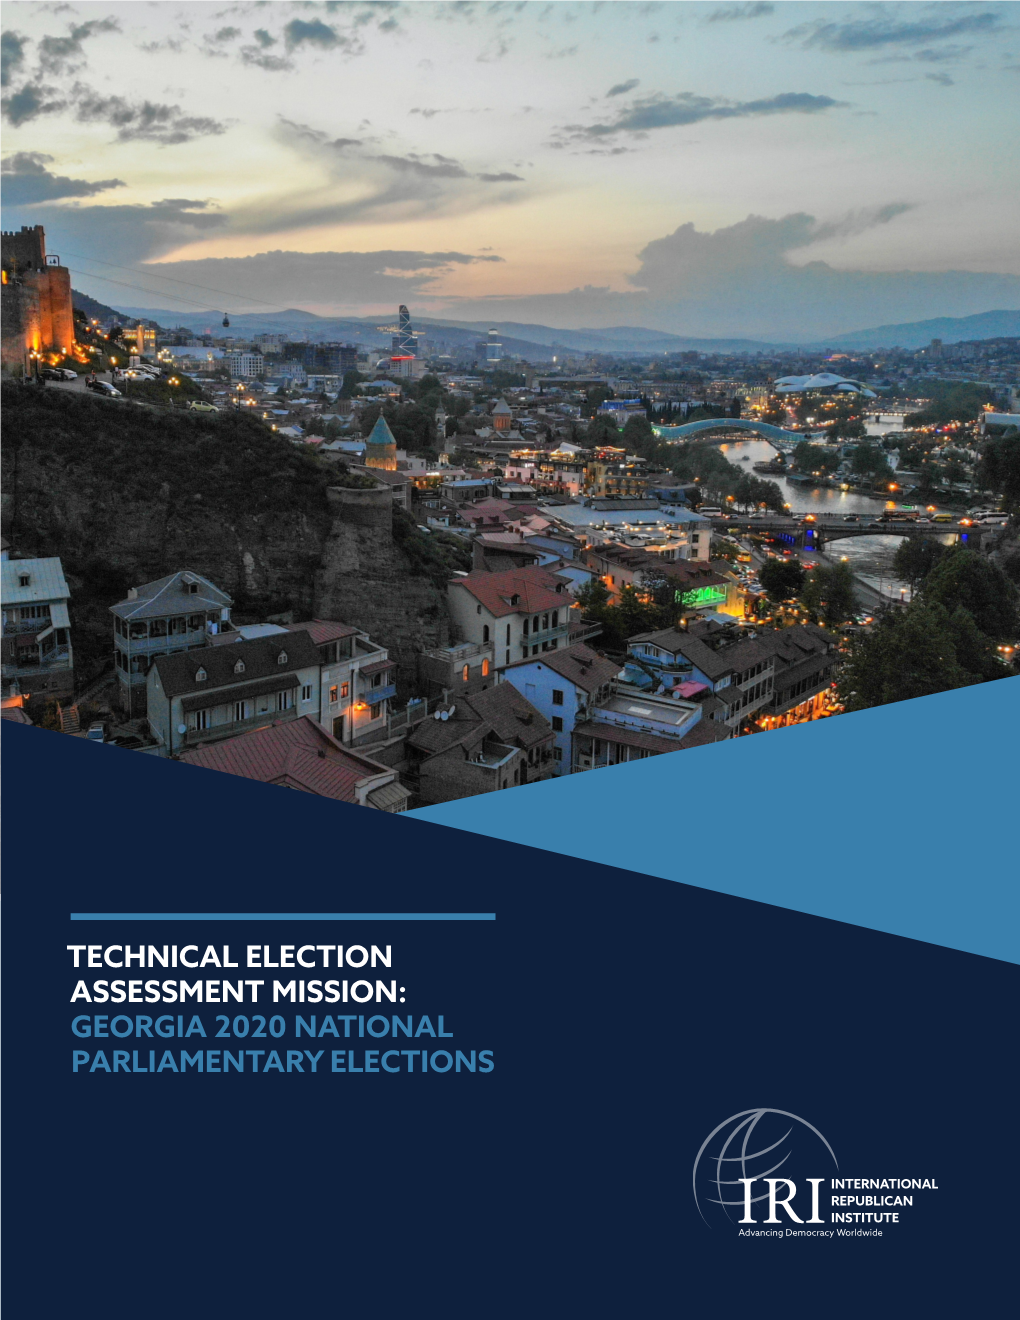 Technical Election Assessment Mission: Georgia 2020 National Parliamentary Elections